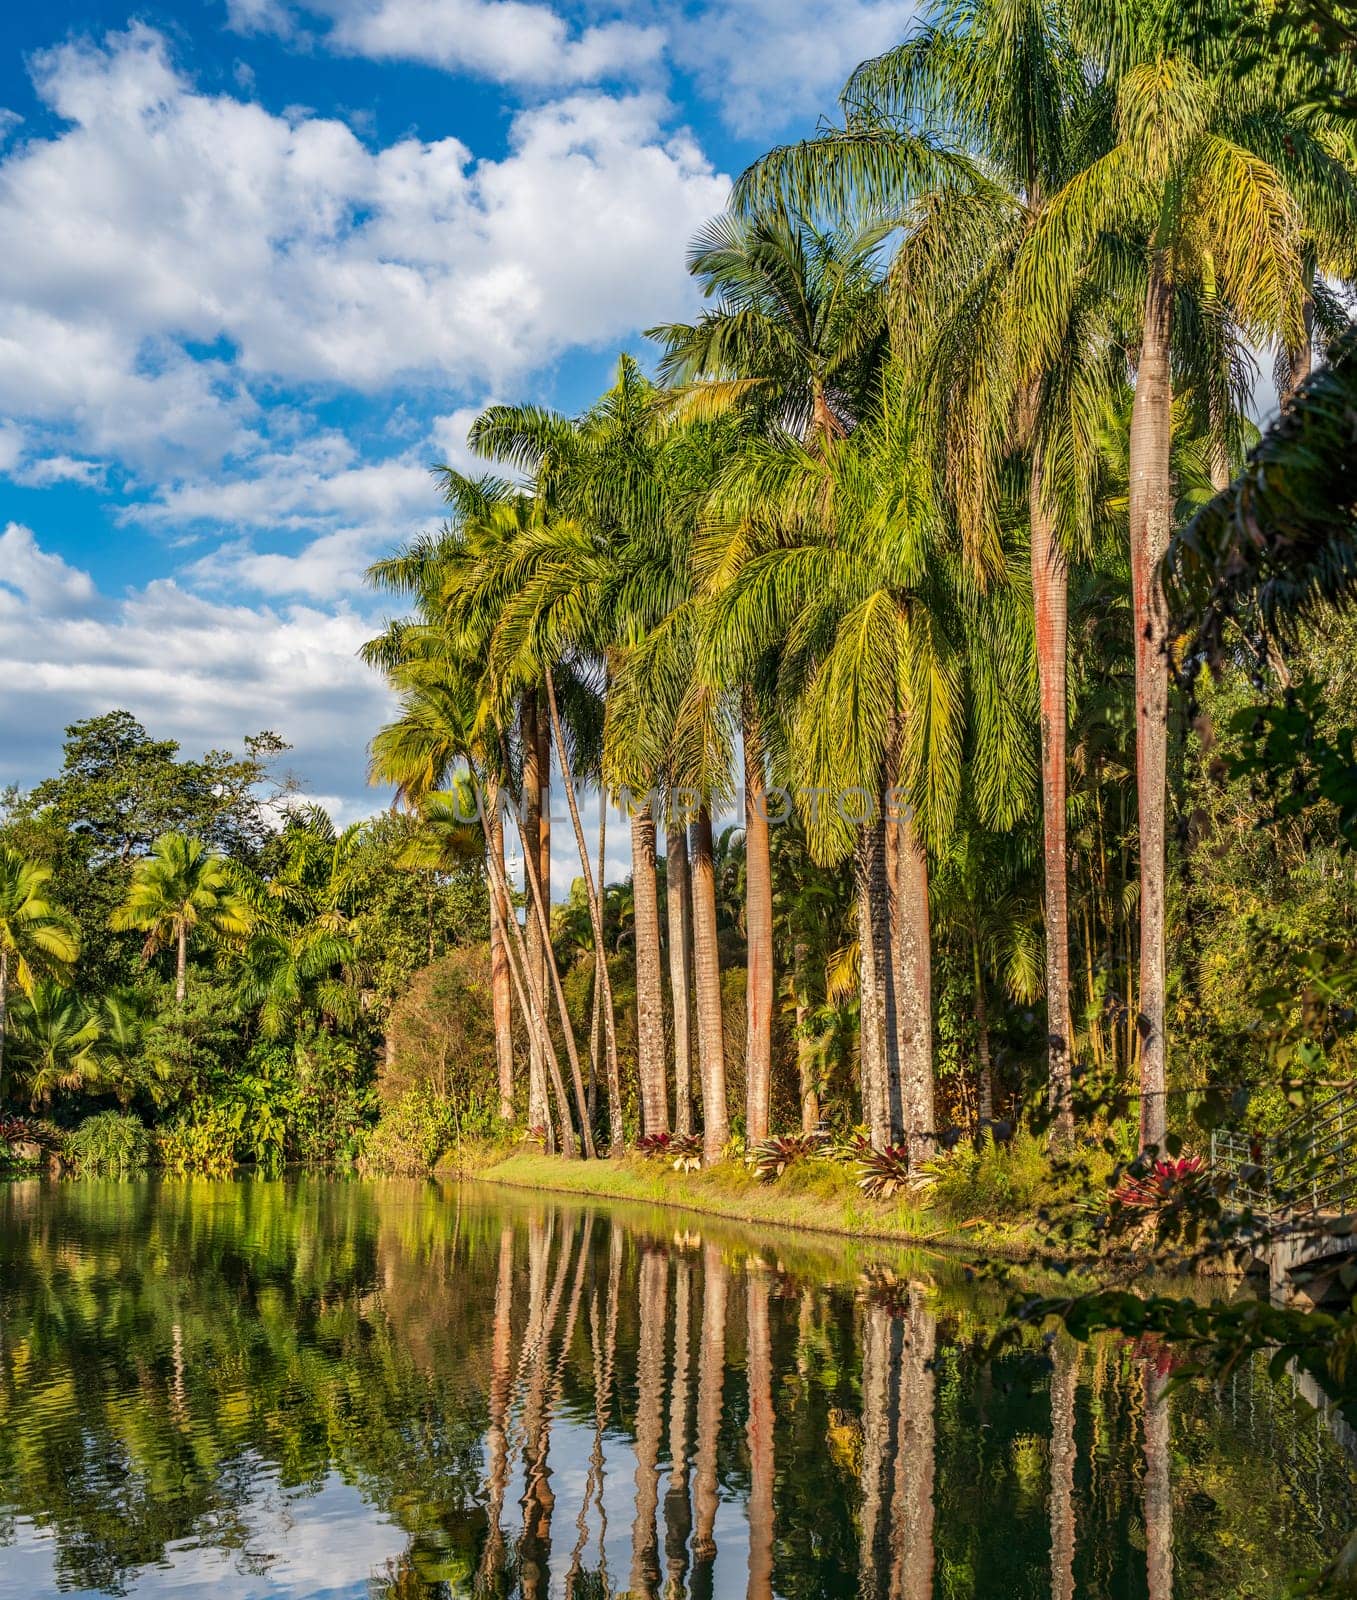 Serene Tropical Paradise with Lush Palms Reflecting on Water by FerradalFCG